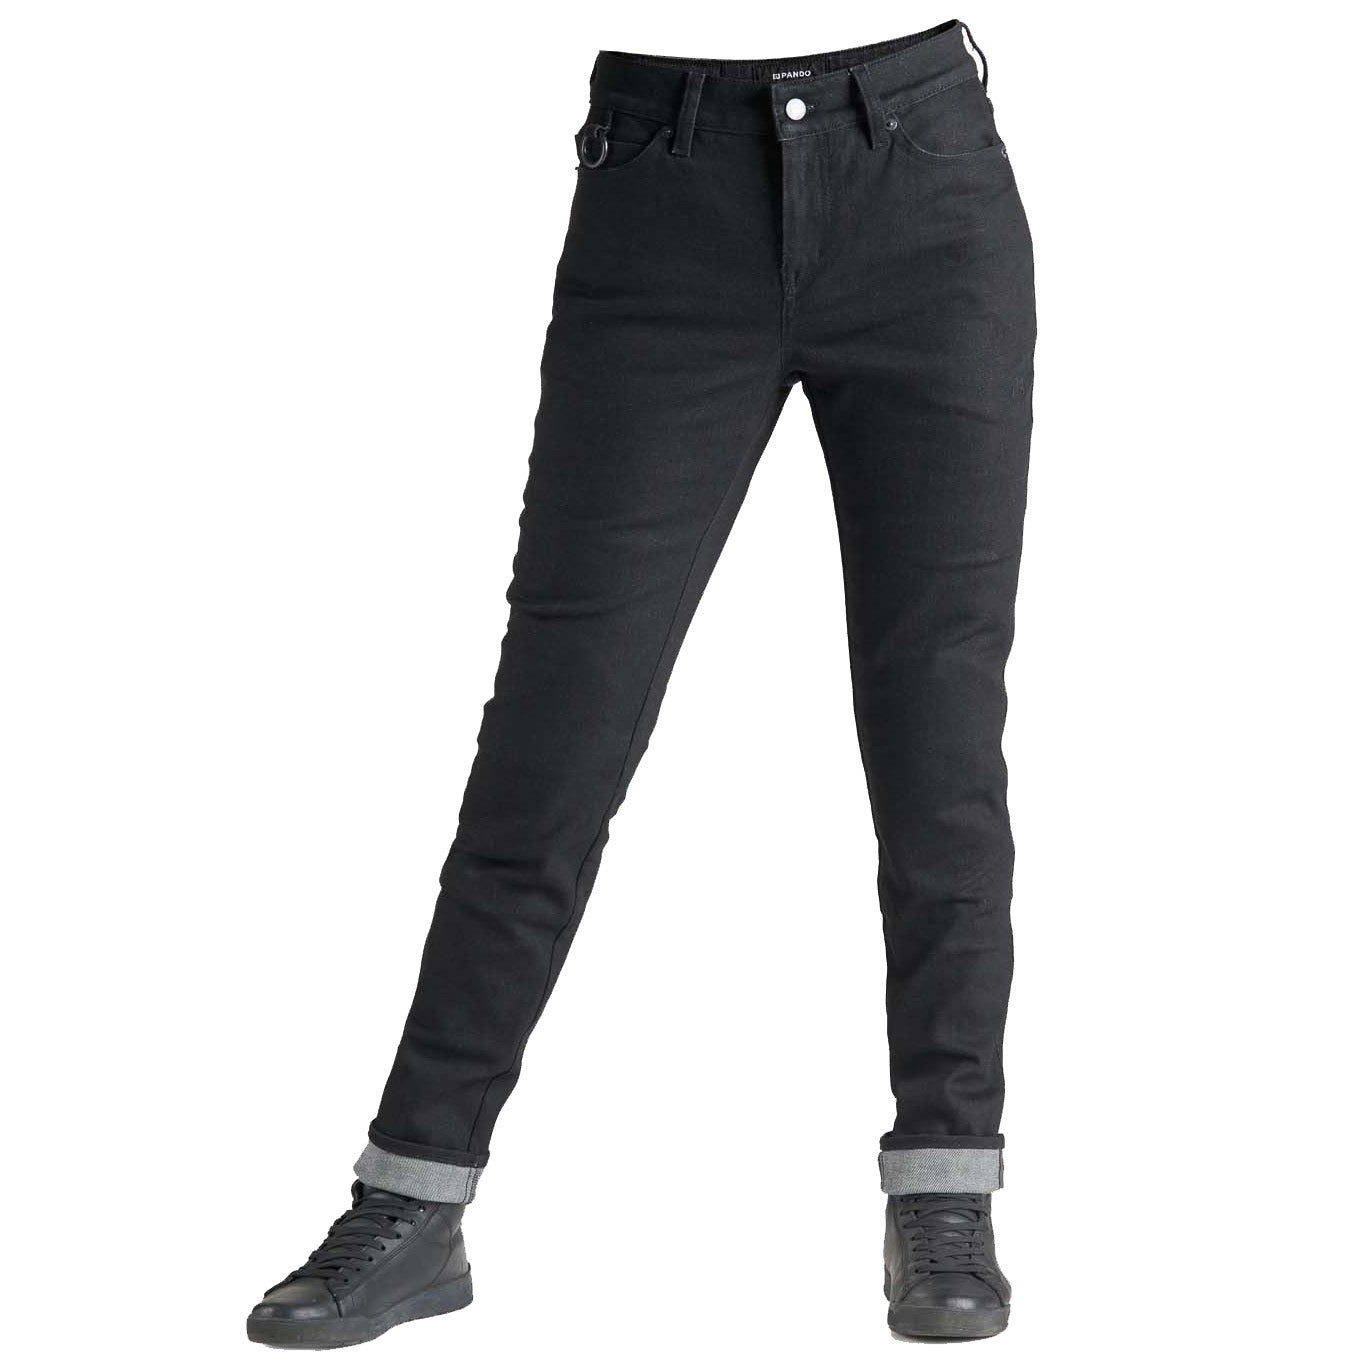 Motorcycle Jeans for Women - Slim-Fit Armalith®, KISSAKI ARM 01